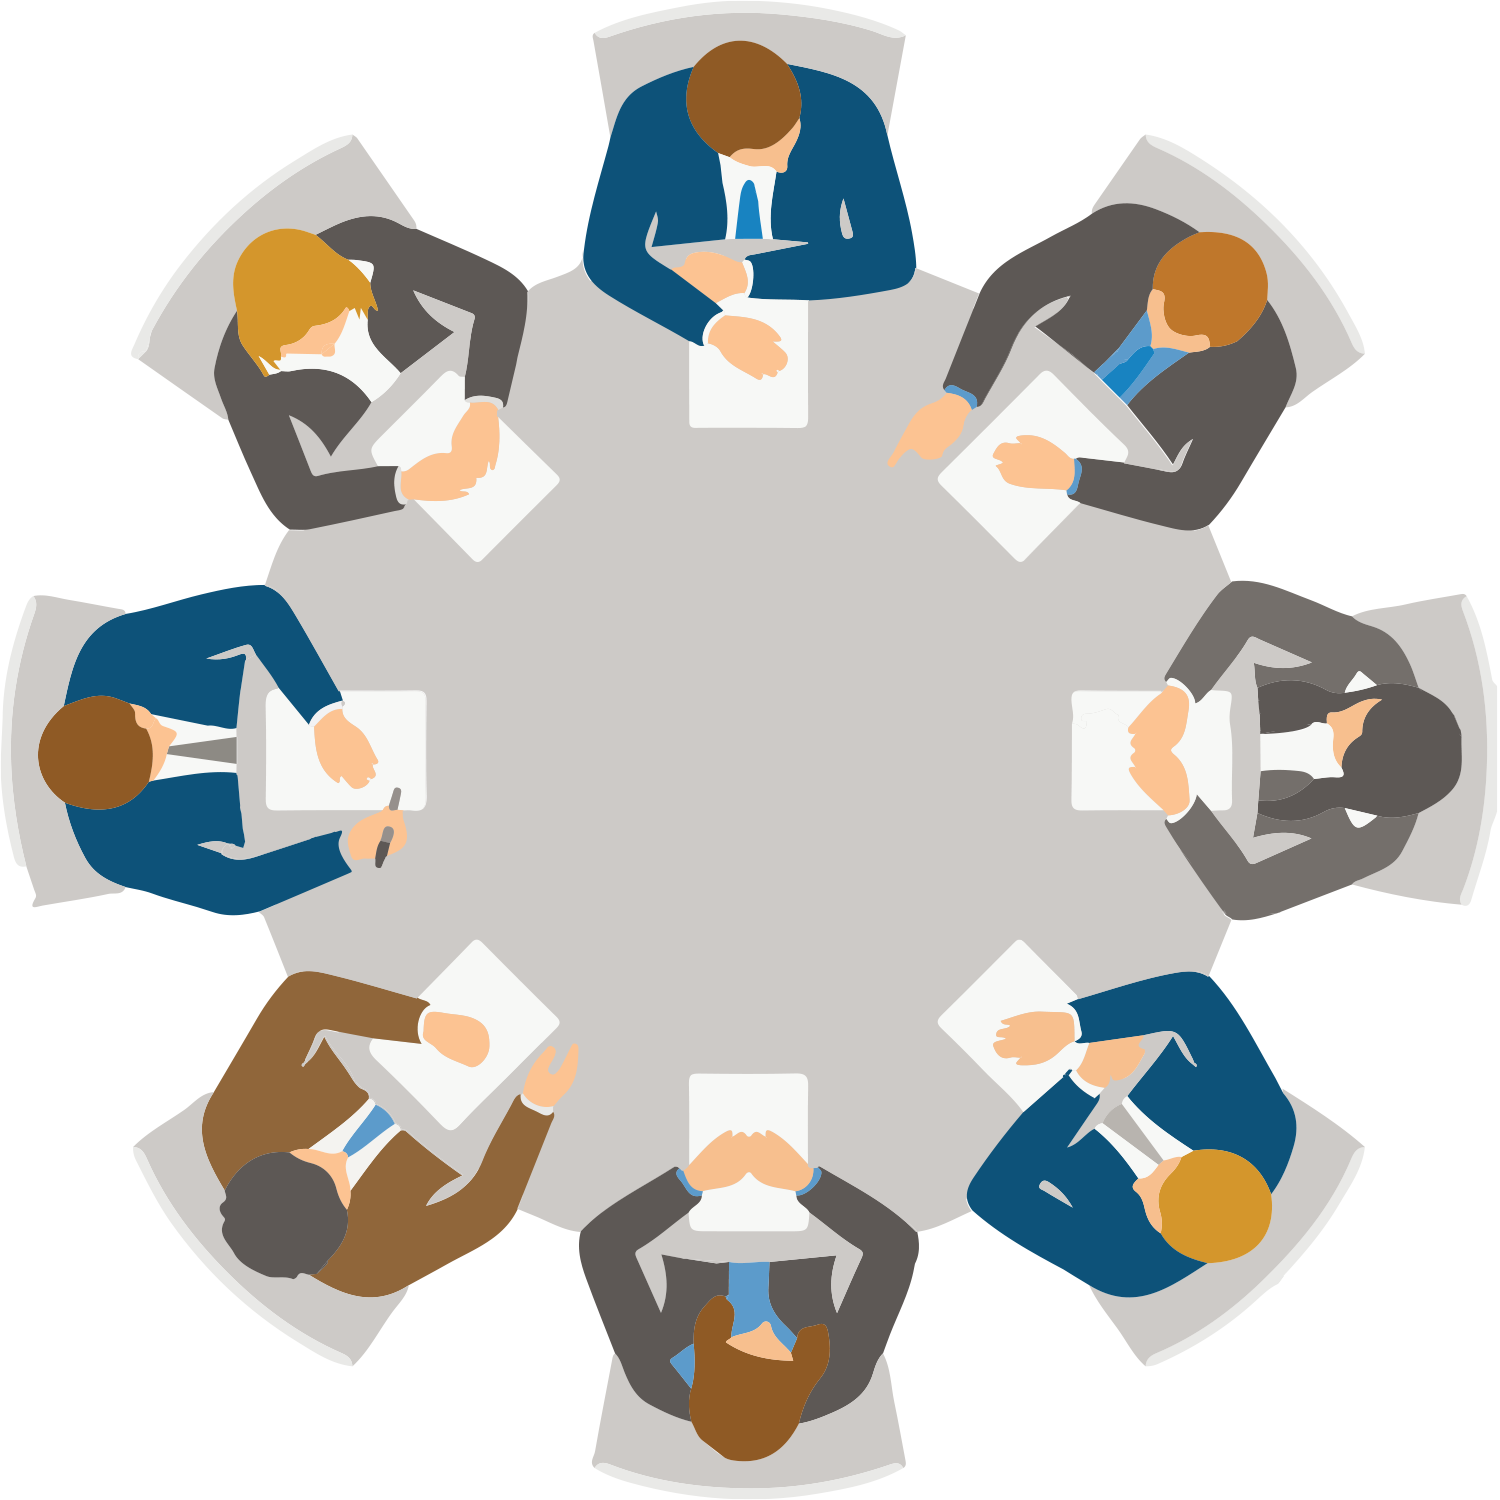 Your own roundtable arlington. Discussion clipart business networking